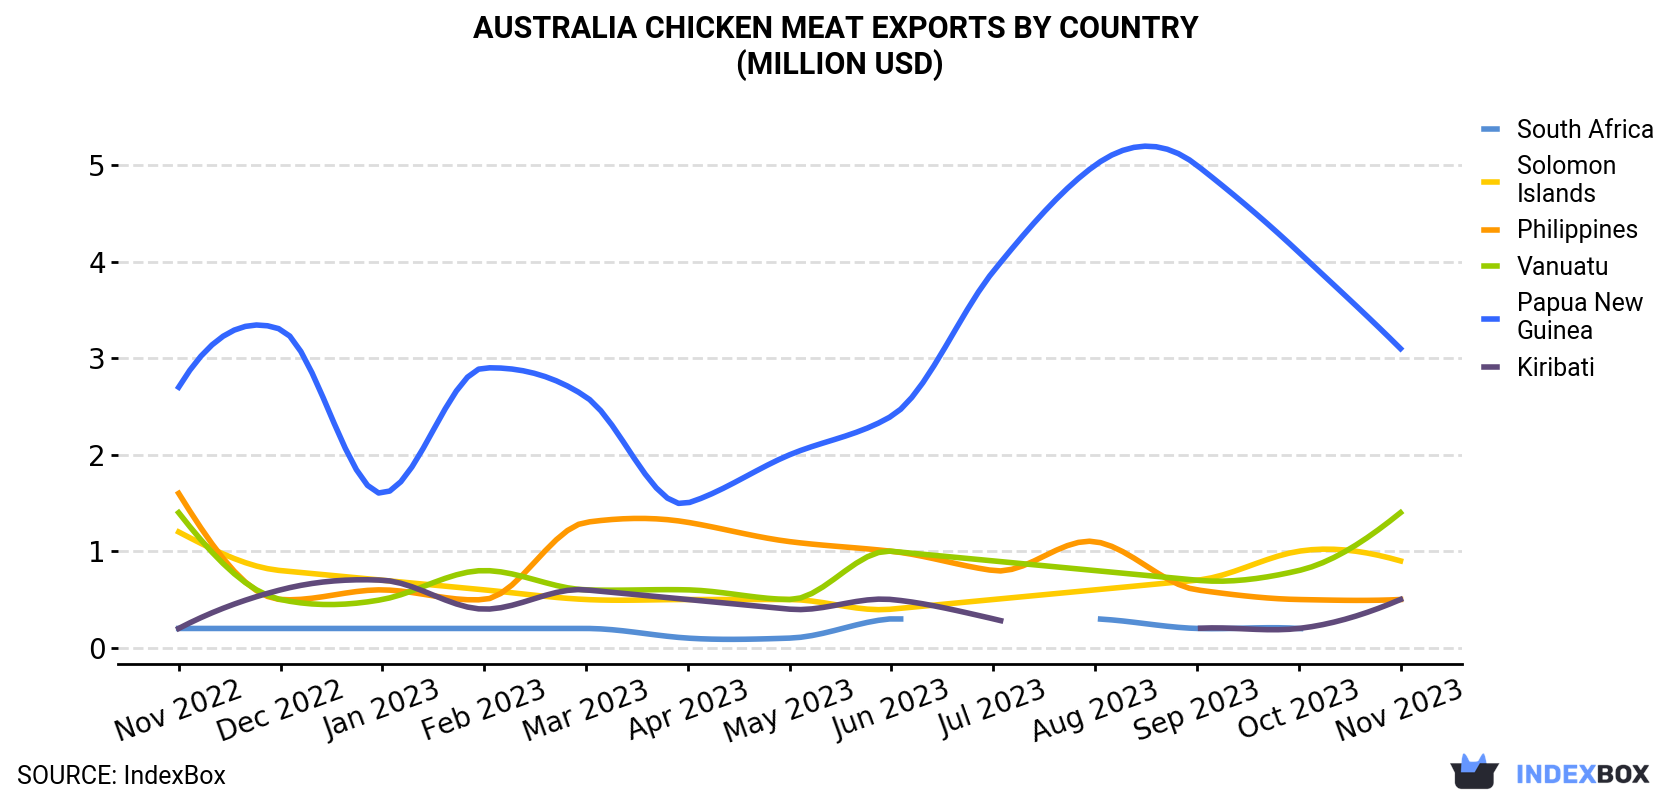 Australia Chicken Meat Exports By Country (Million USD)